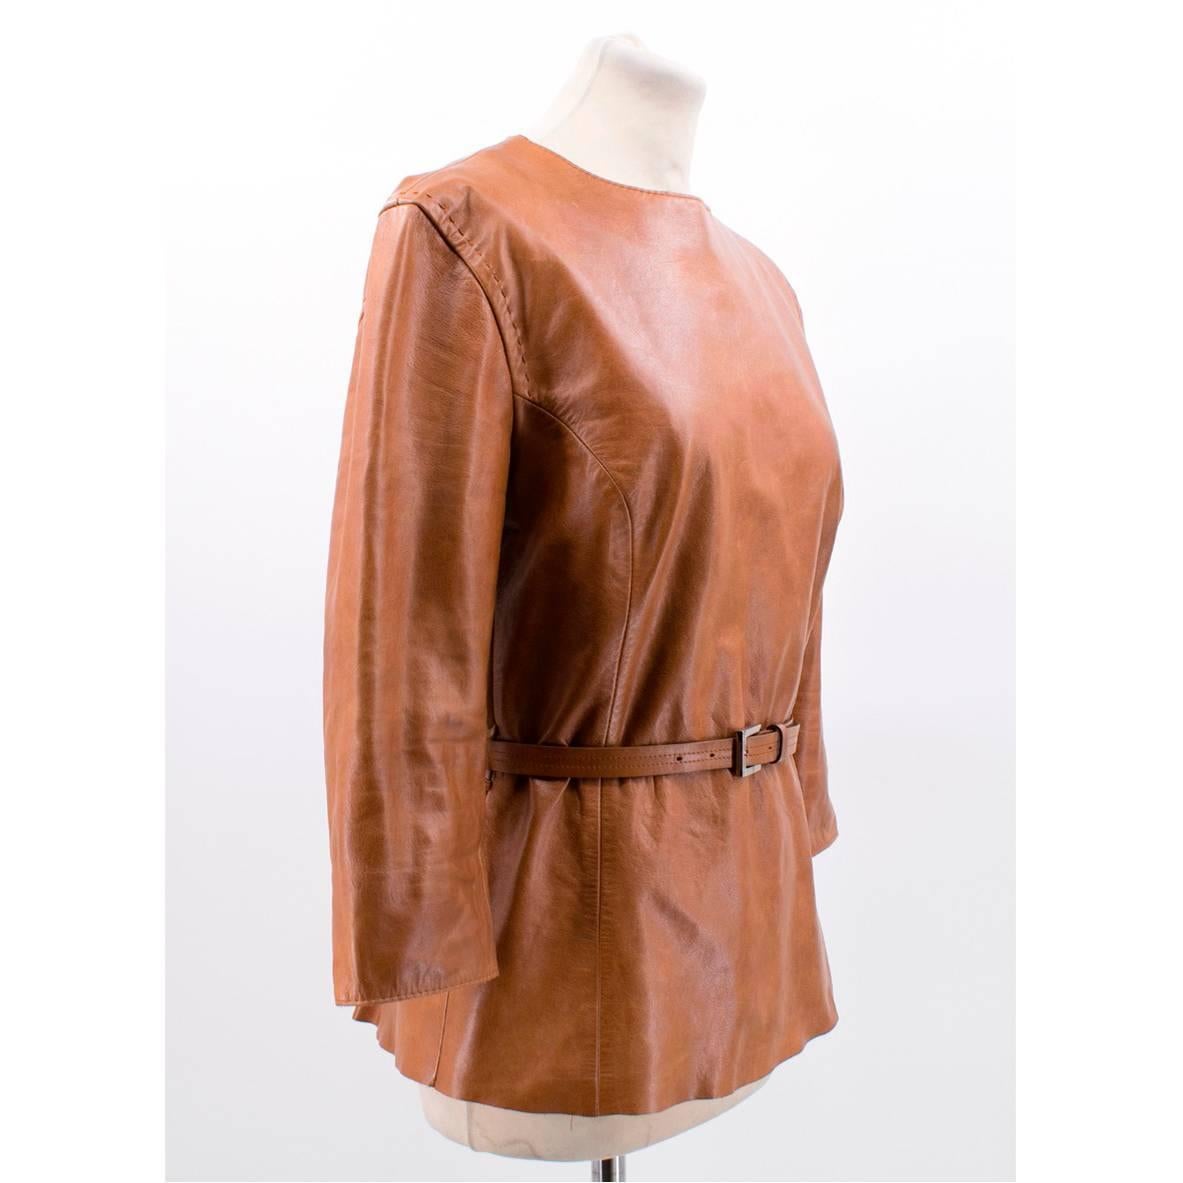 Gianfranco Ferre Leather Top For Sale 2